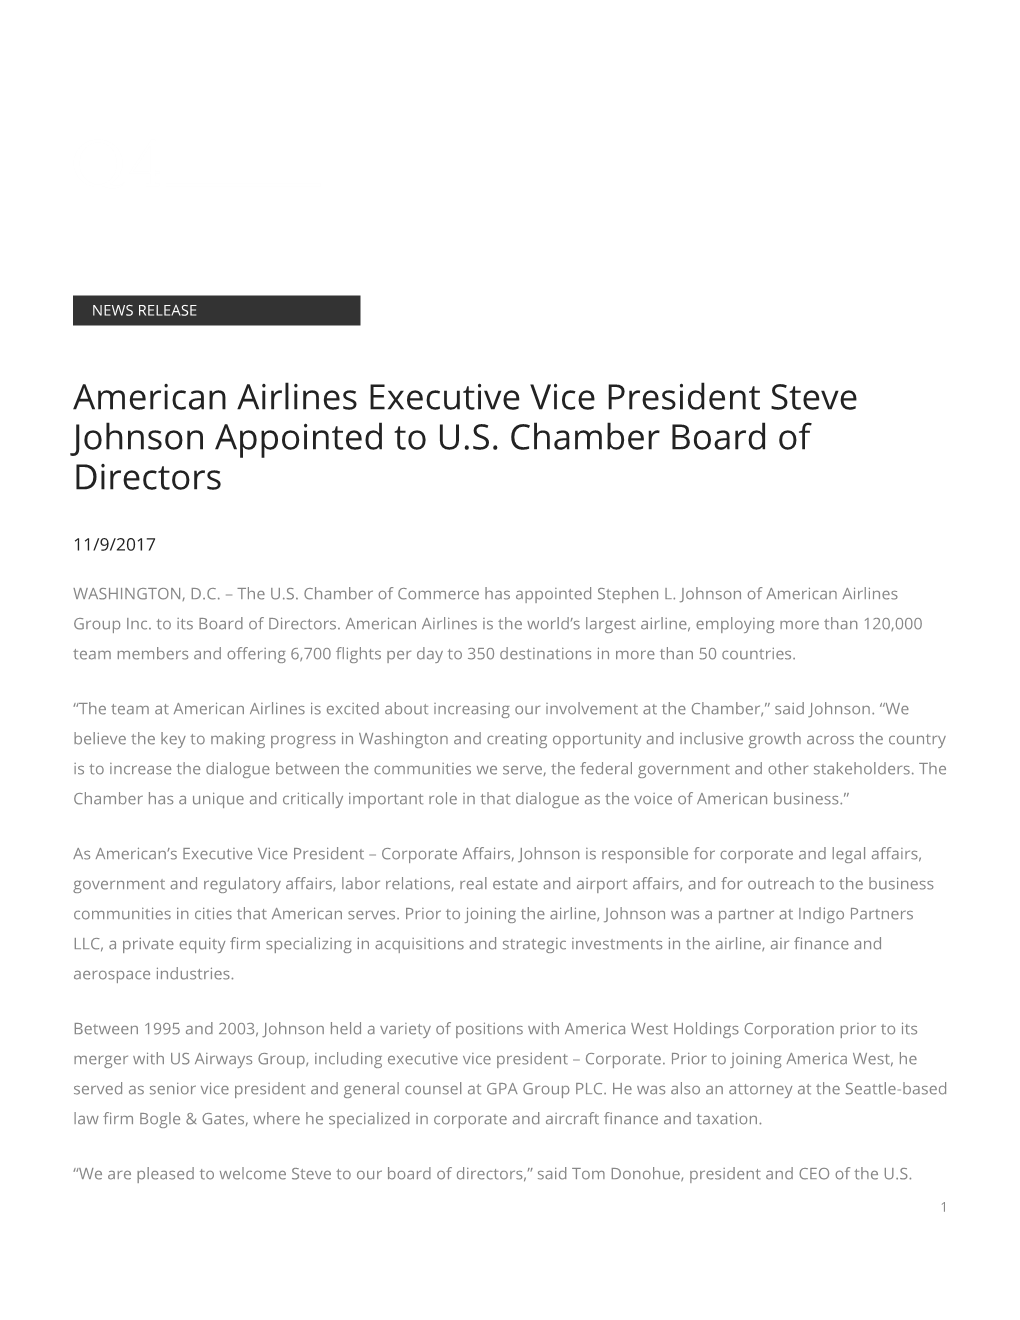 American Airlines Executive Vice President Steve Johnson Appointed to U.S. Chamber Board of Directors